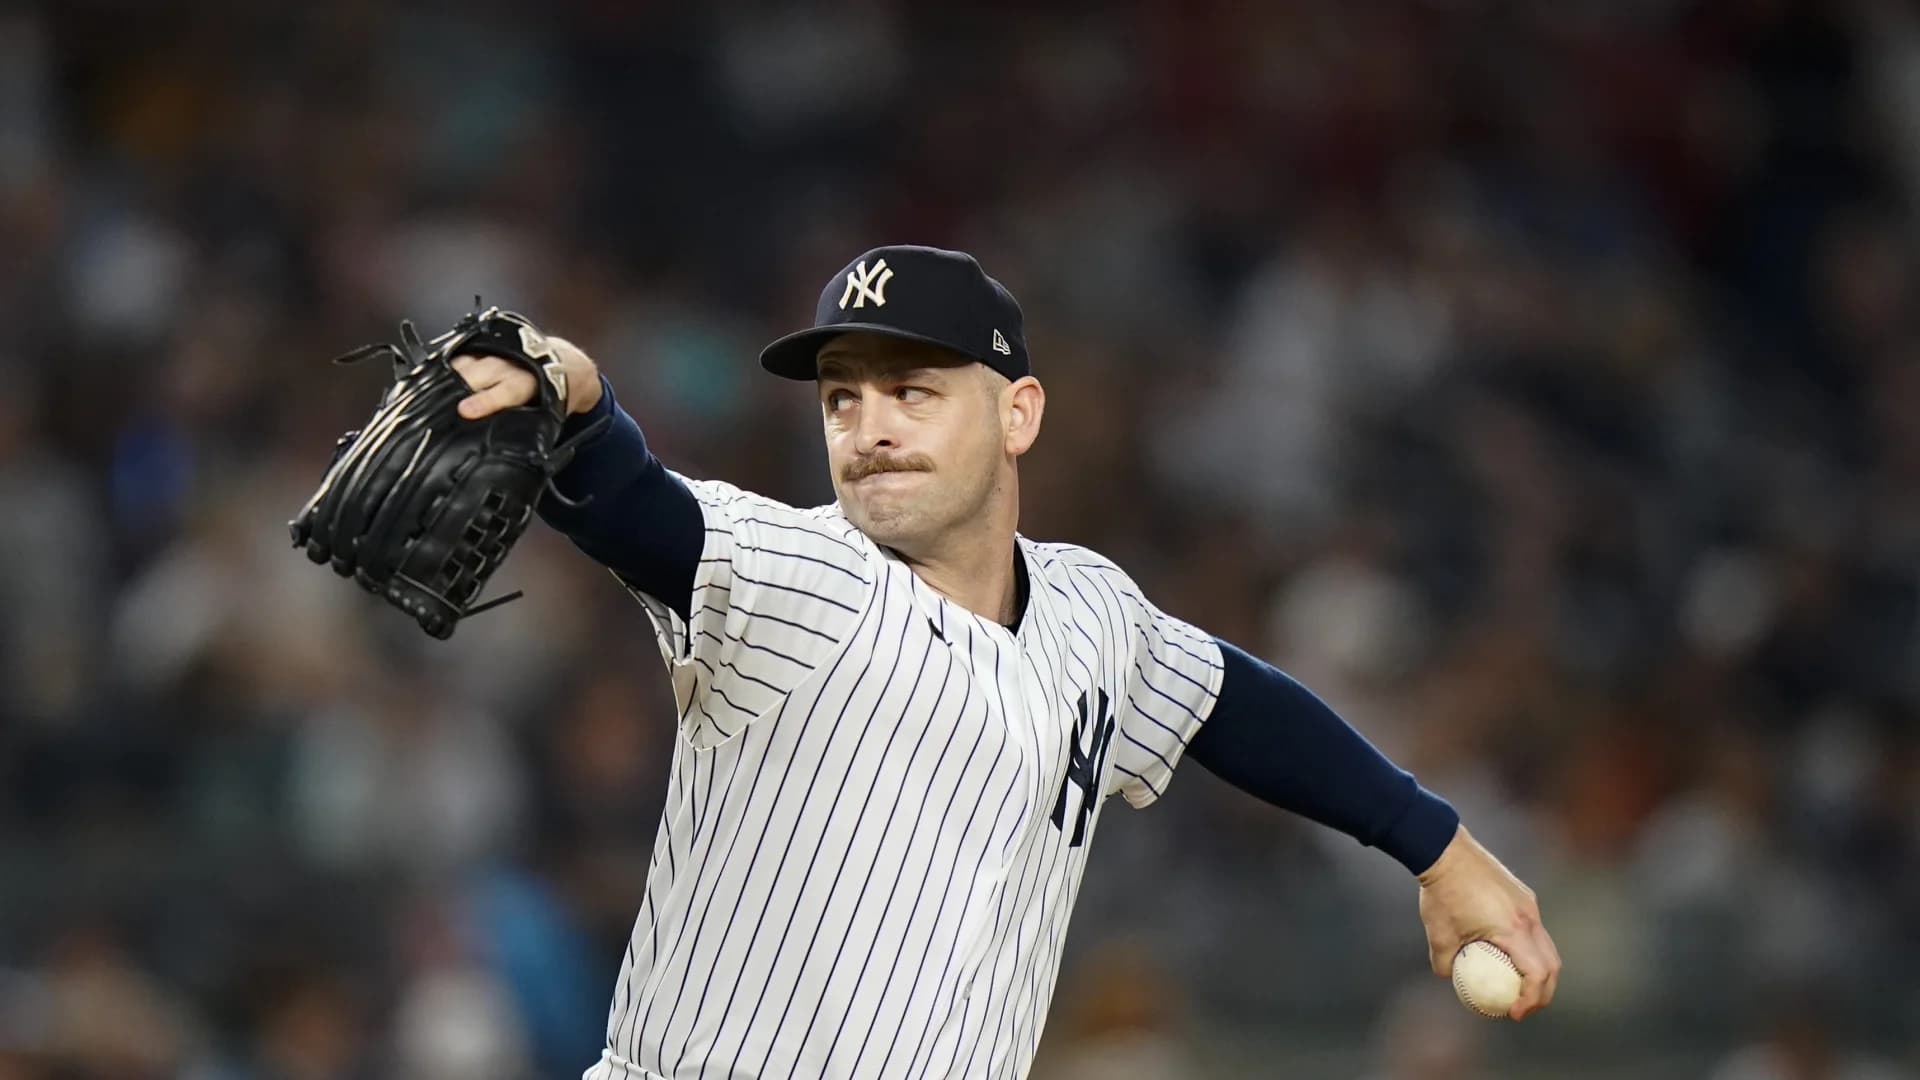 Braves acquire LHP Luetge from Yankees for 2 minor leaguers